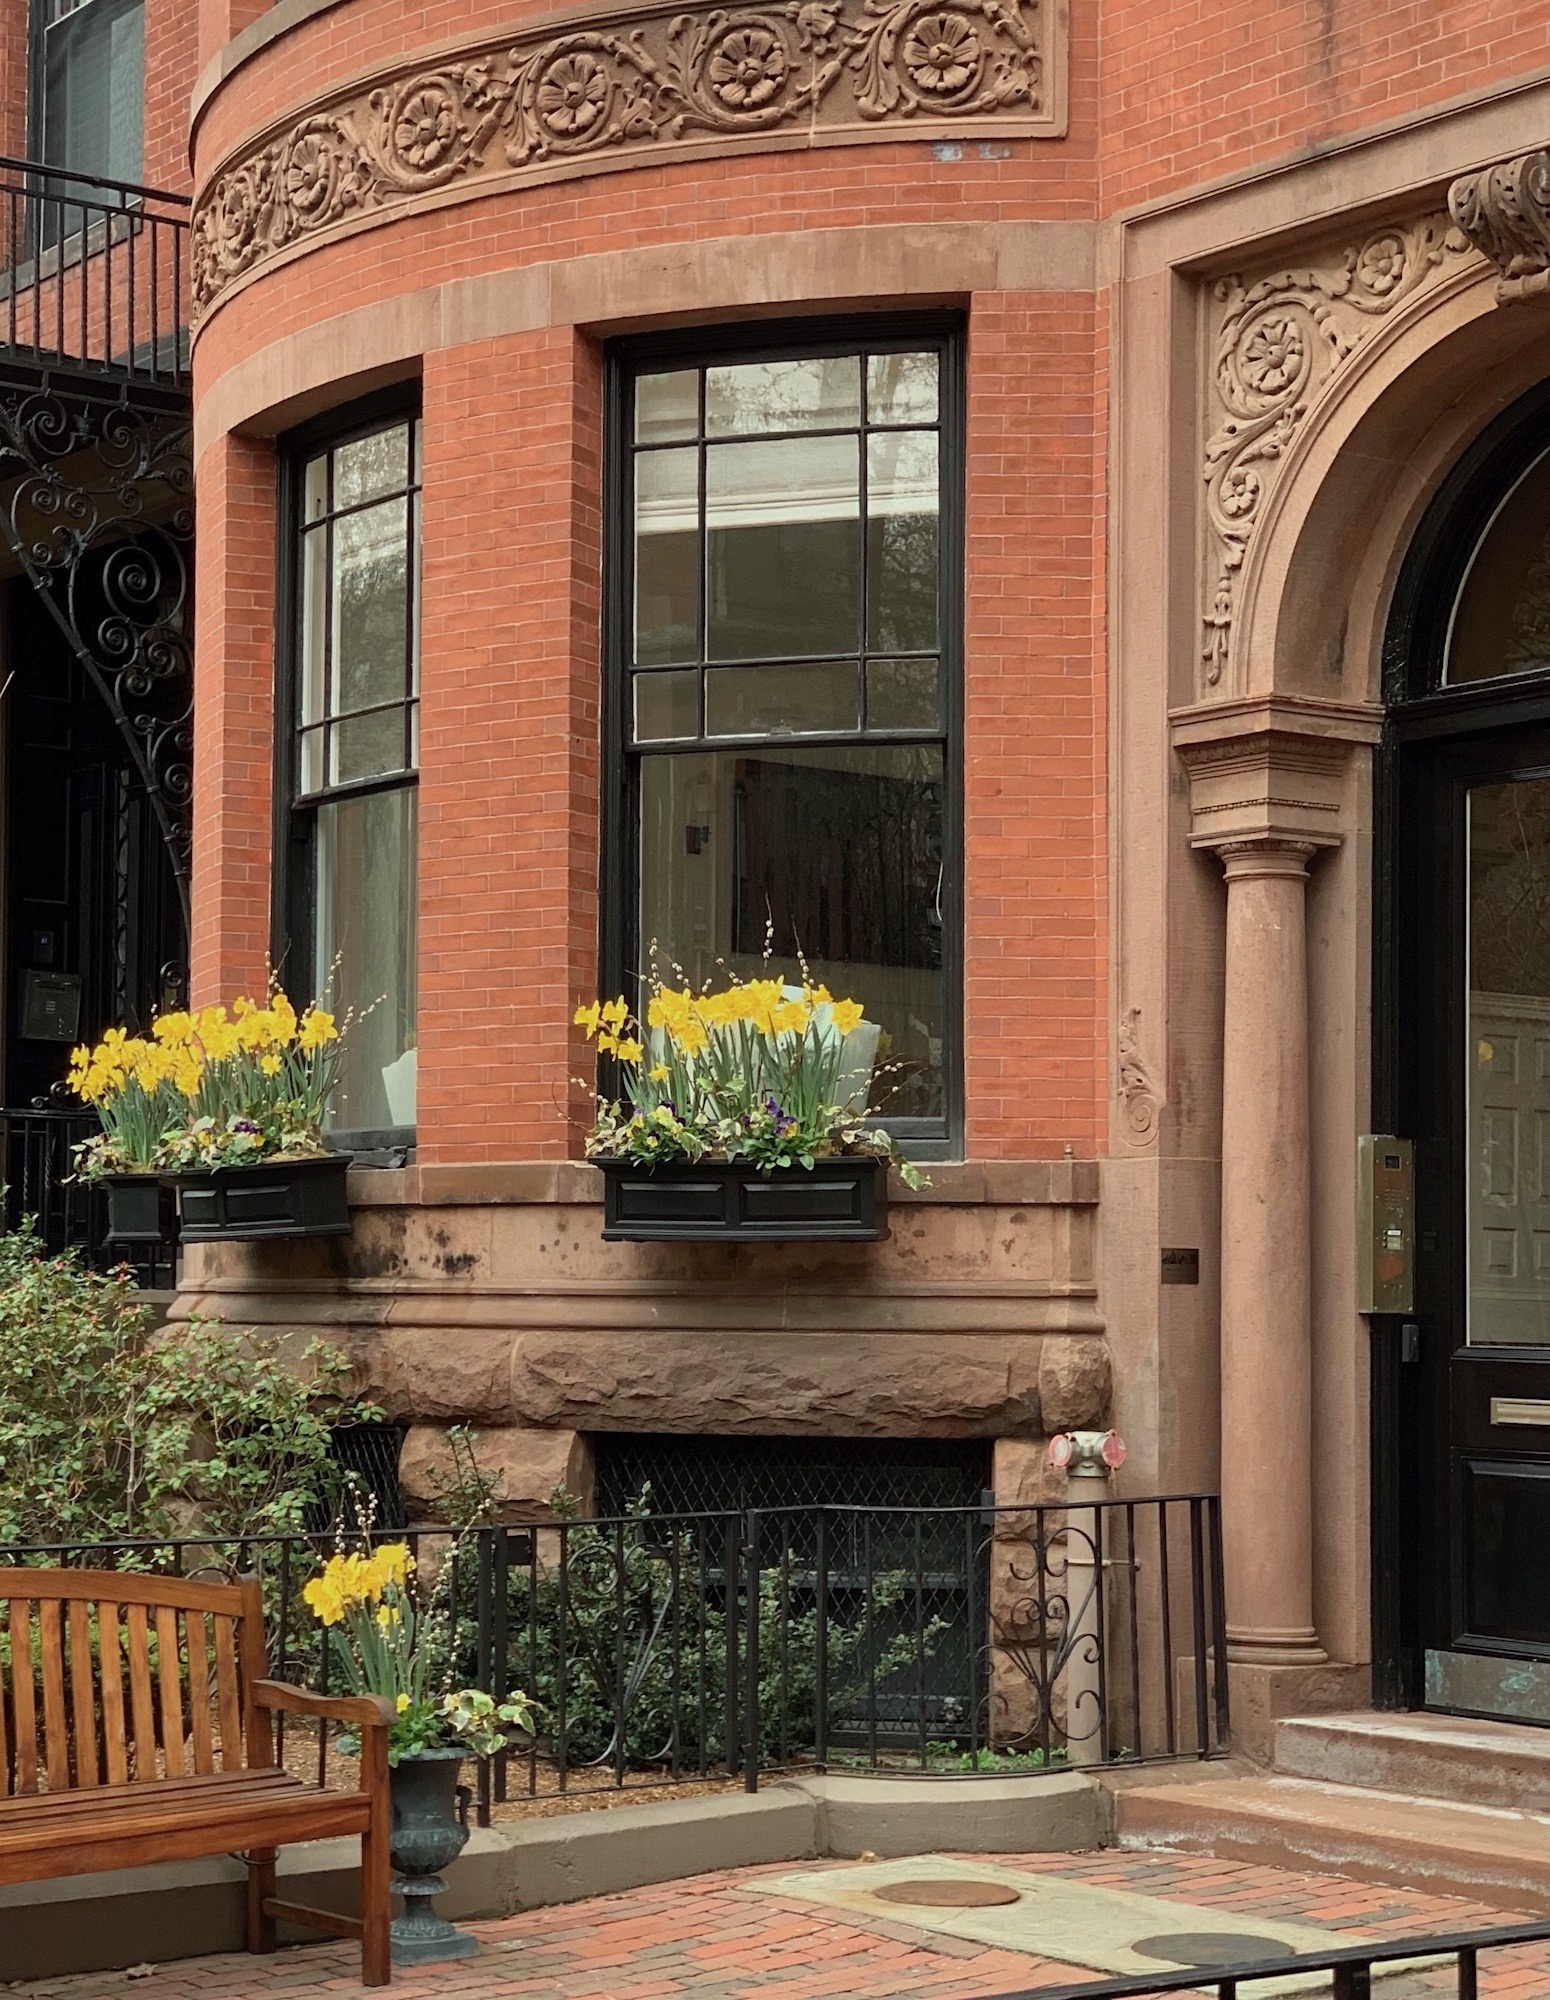 Color Palettes From Nature - Springtime in Boston - Marlborough St - yellow daffodils